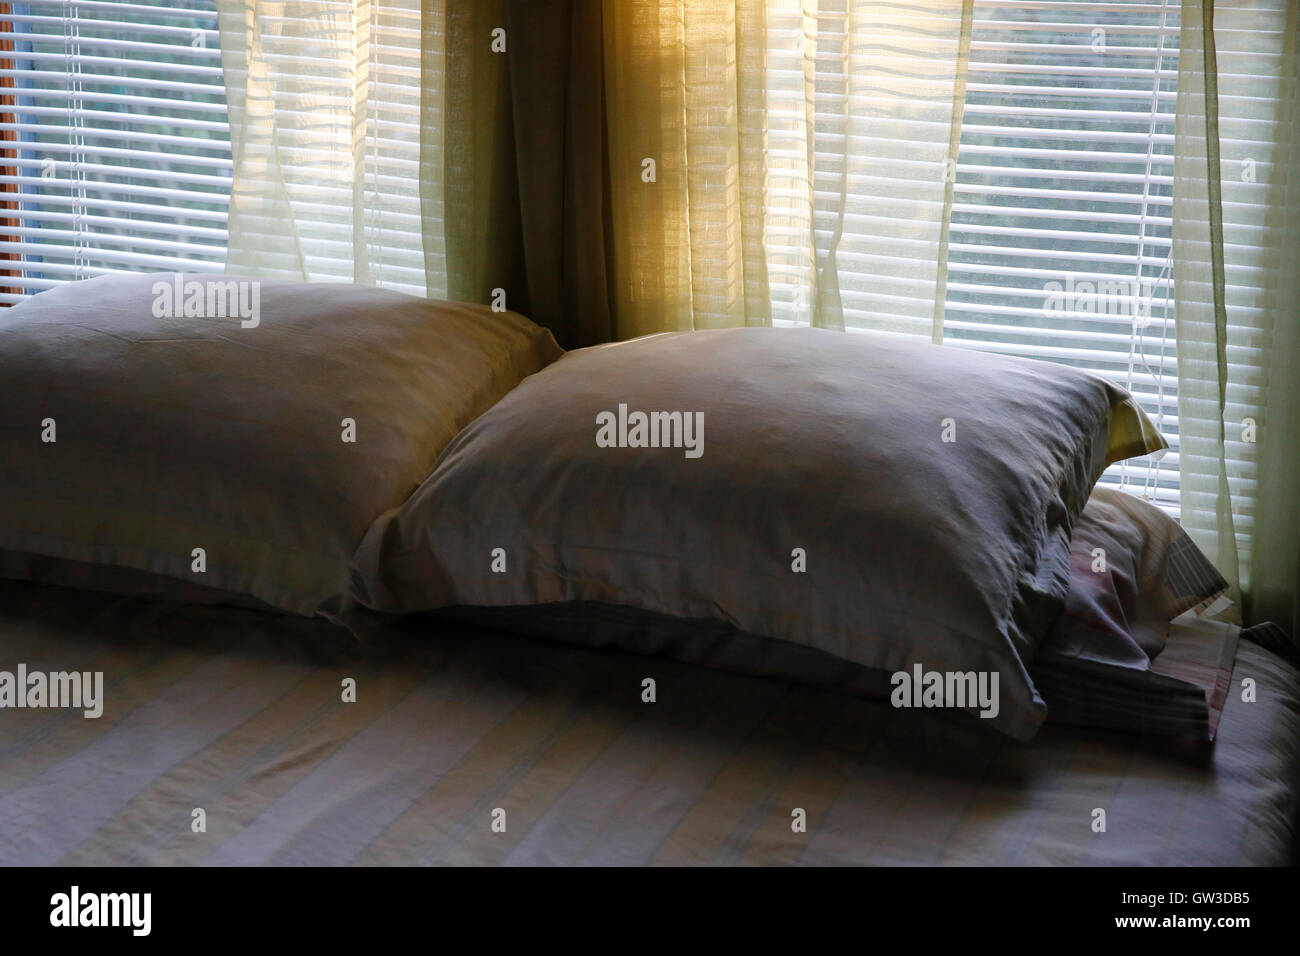 pillows on a bed late afternoon light filtering through the window Stock Photo